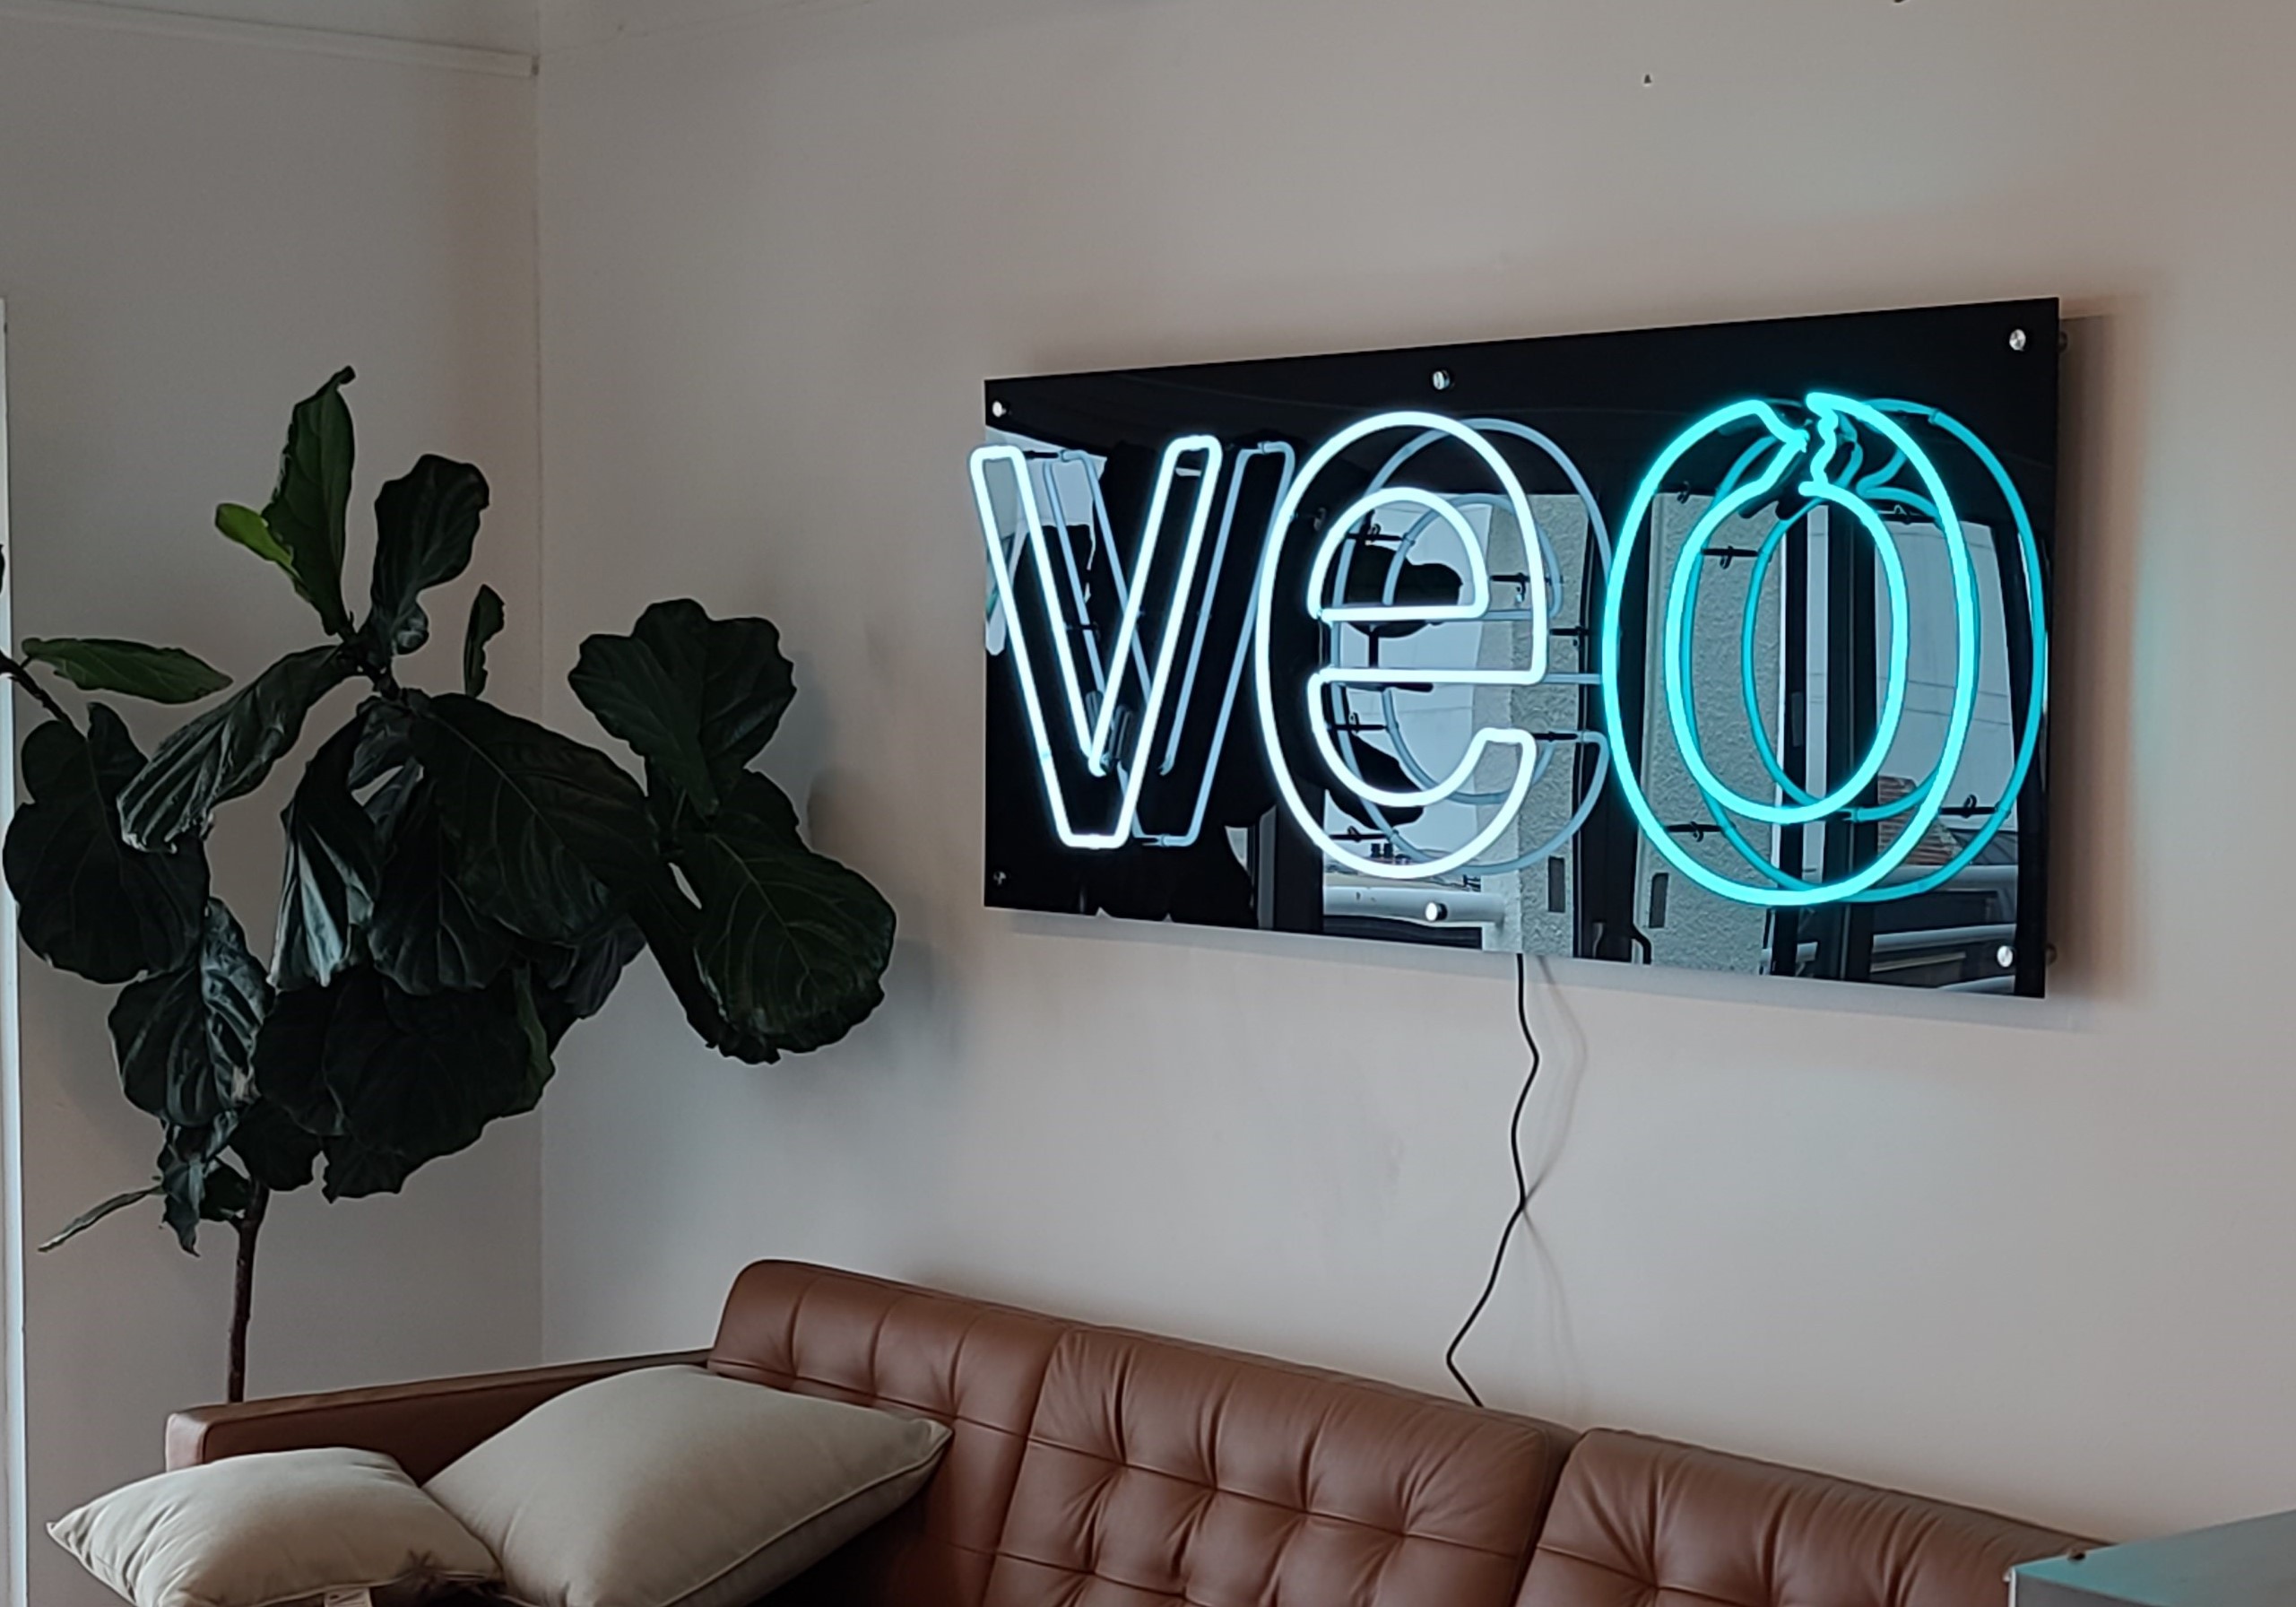 You are currently viewing Neon Lobby Sign for Veo in Santa Monica